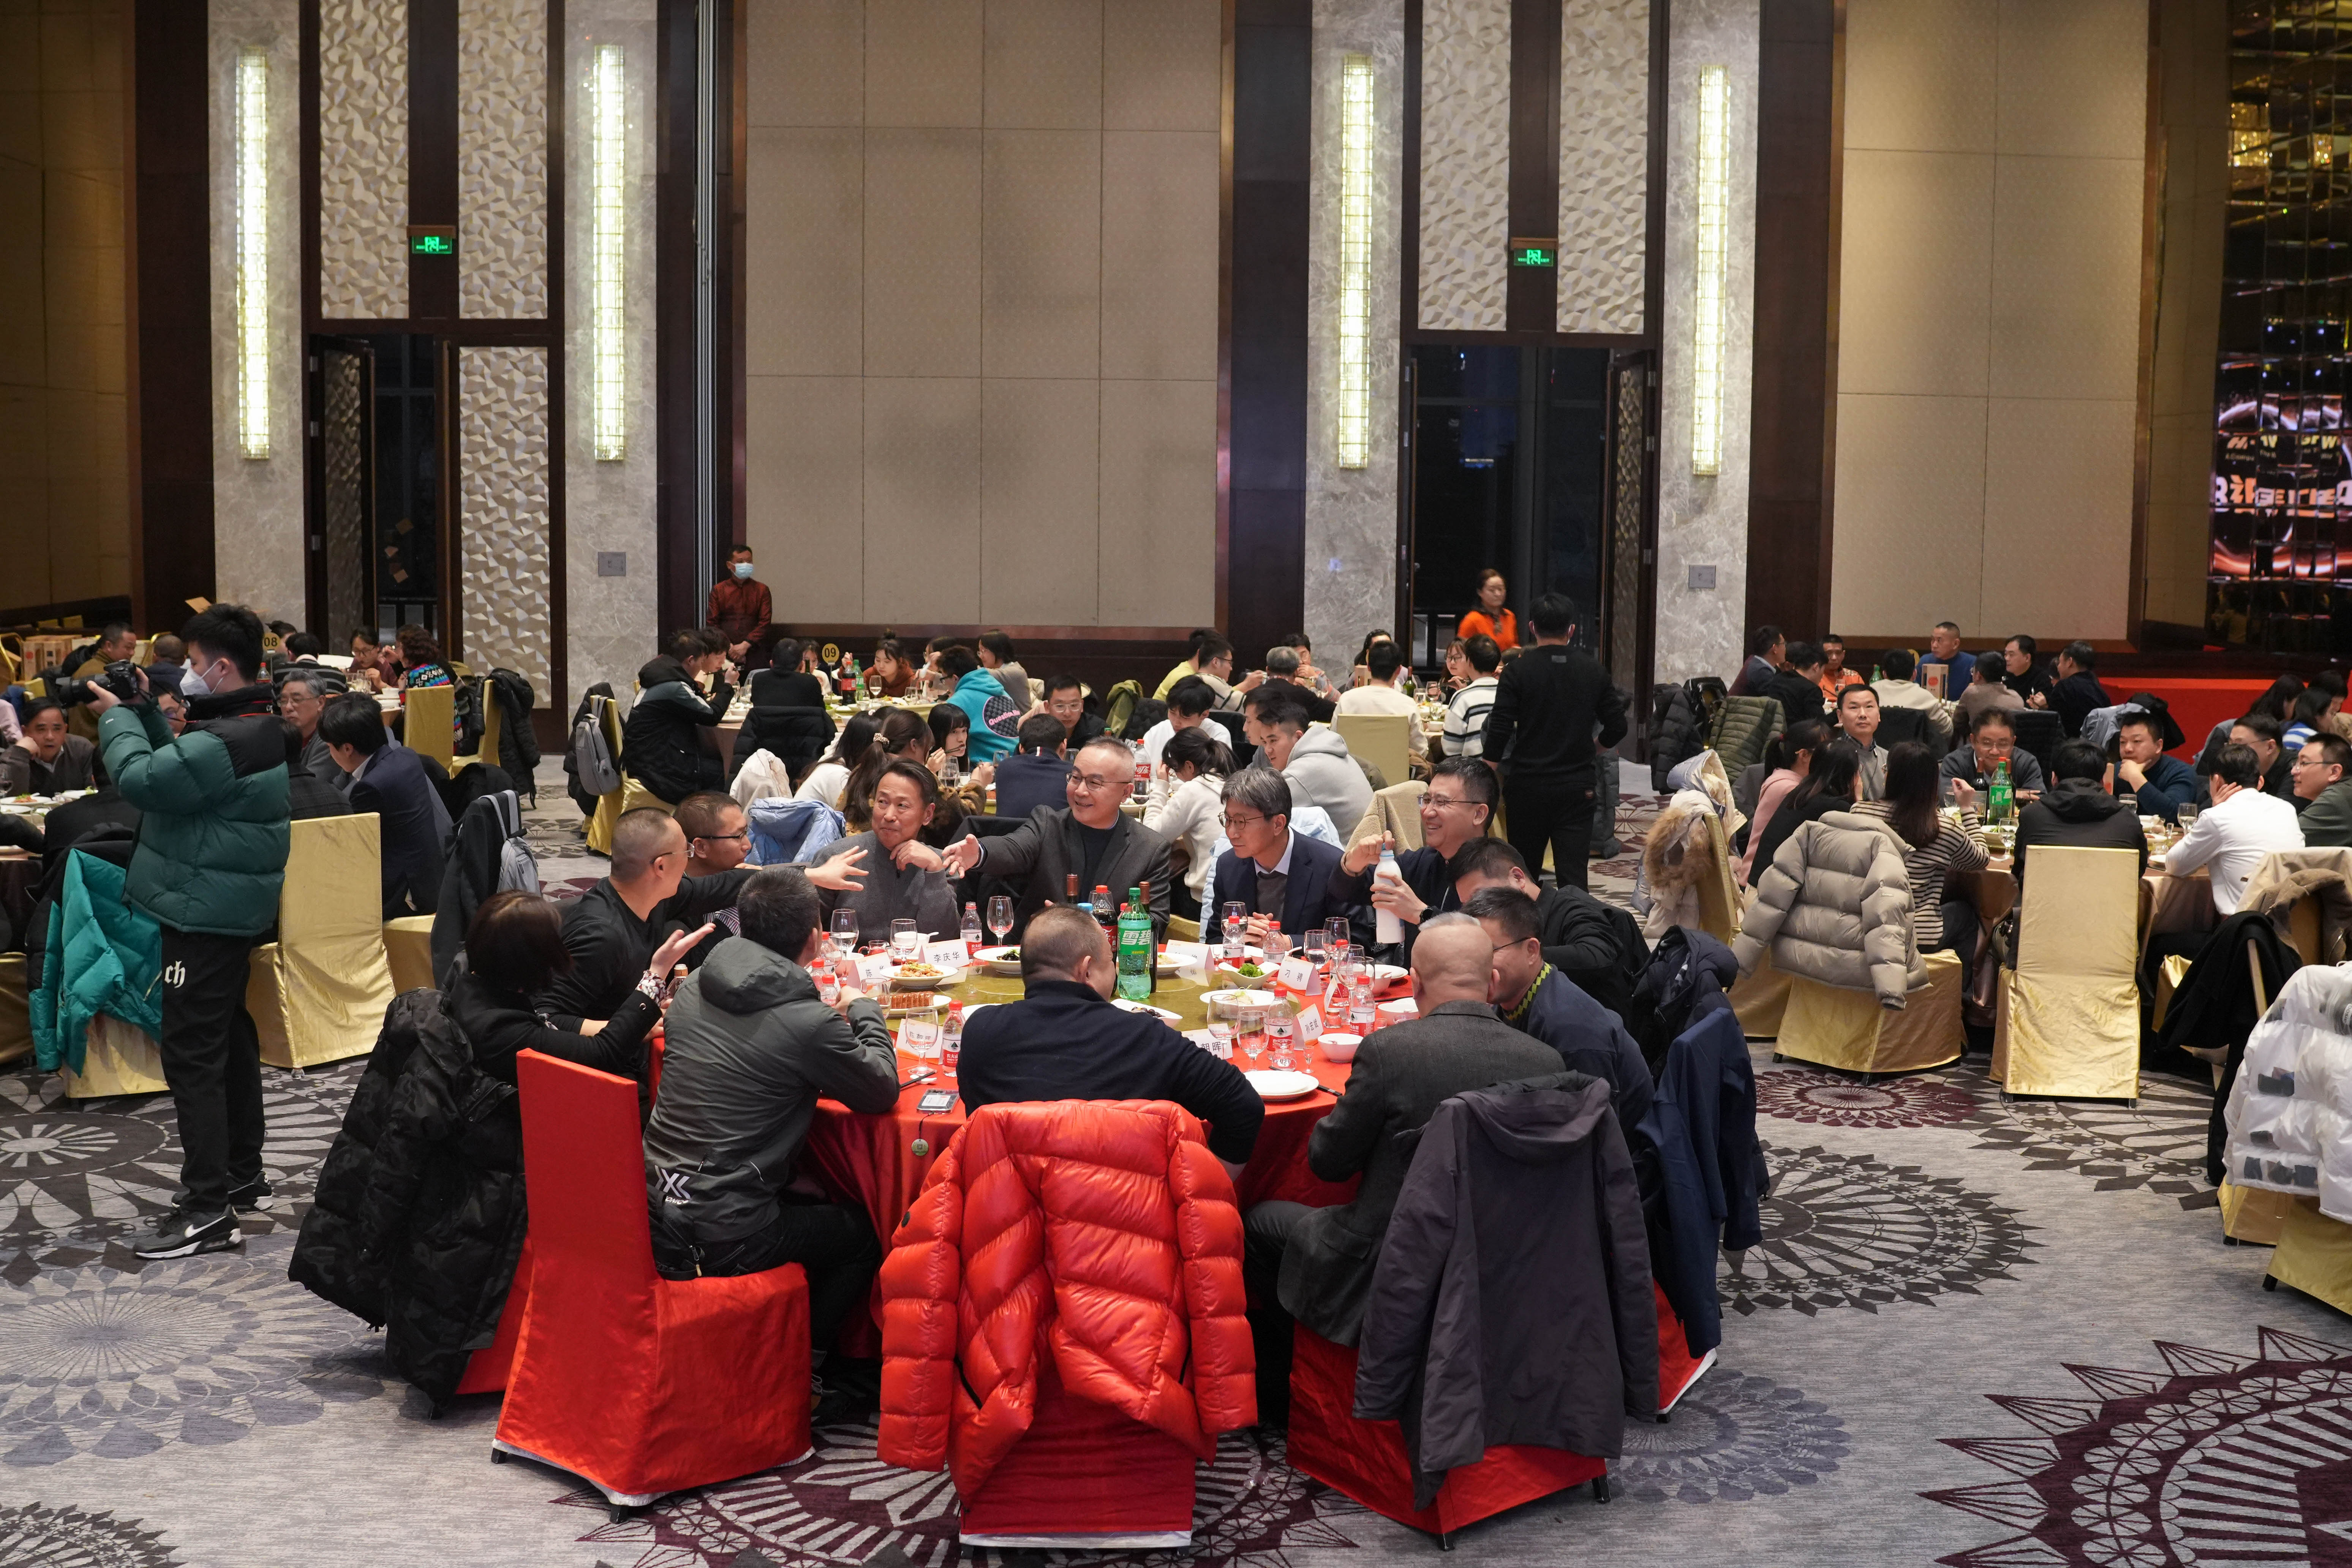 GHW 2023 Spring Festival Dinner was successfully held